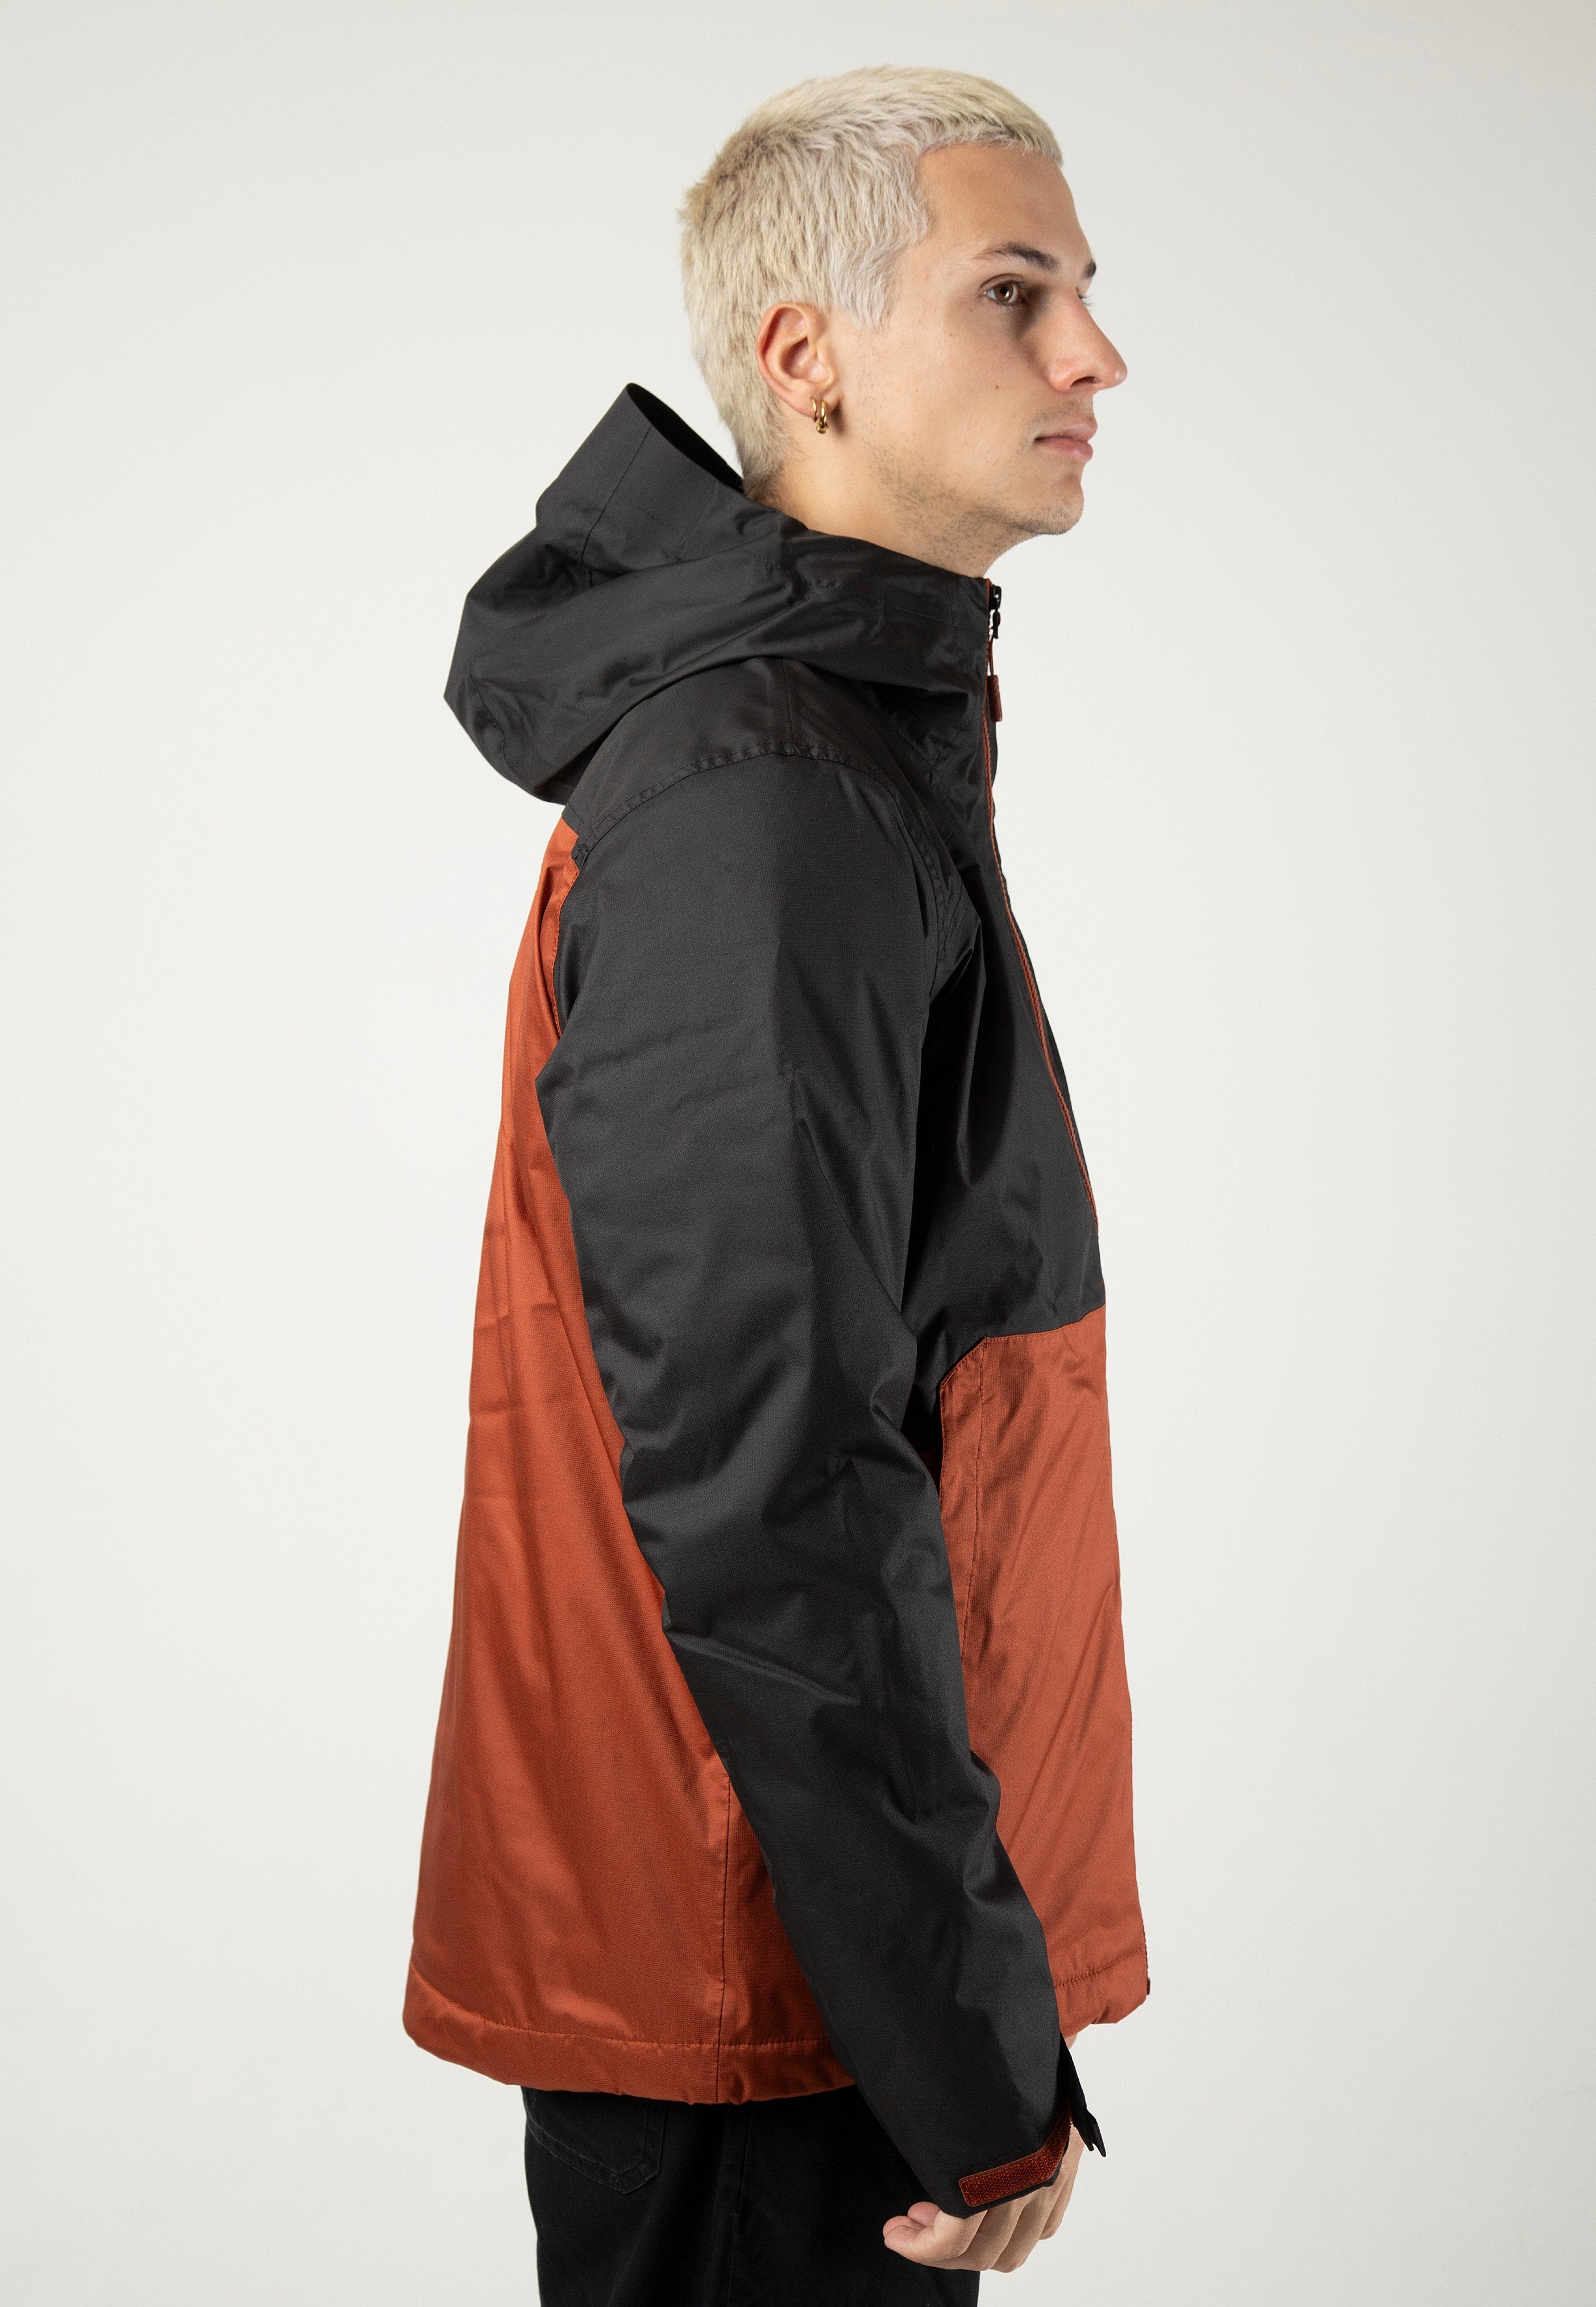 The North Face - Millerton Insulated Brandybn/Tnf Black - Jacket